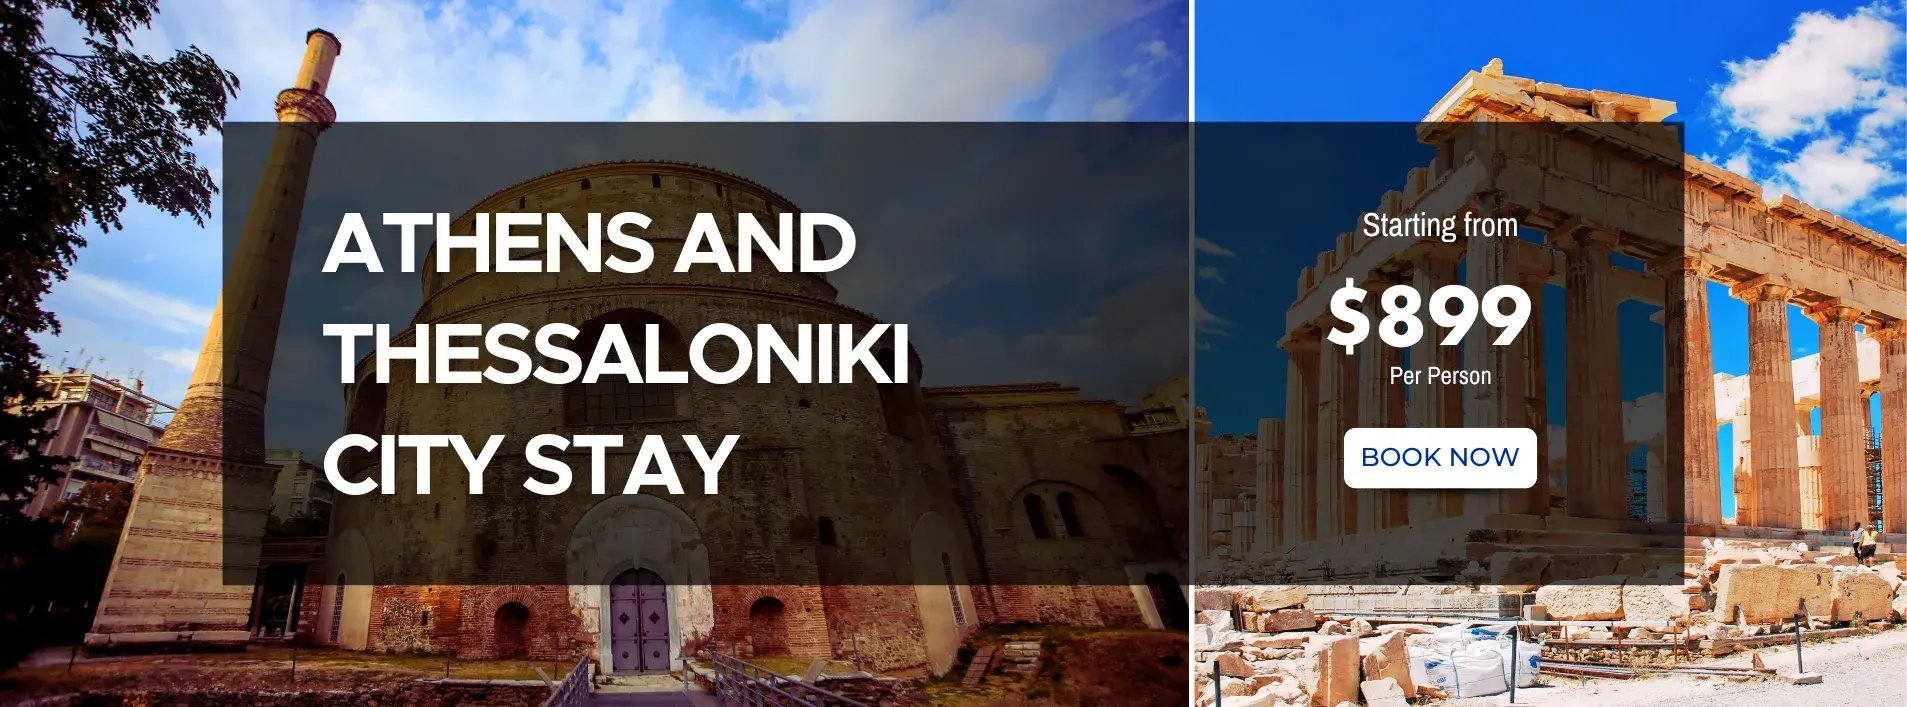 Athens and Thessaloniki City Stay W/Air